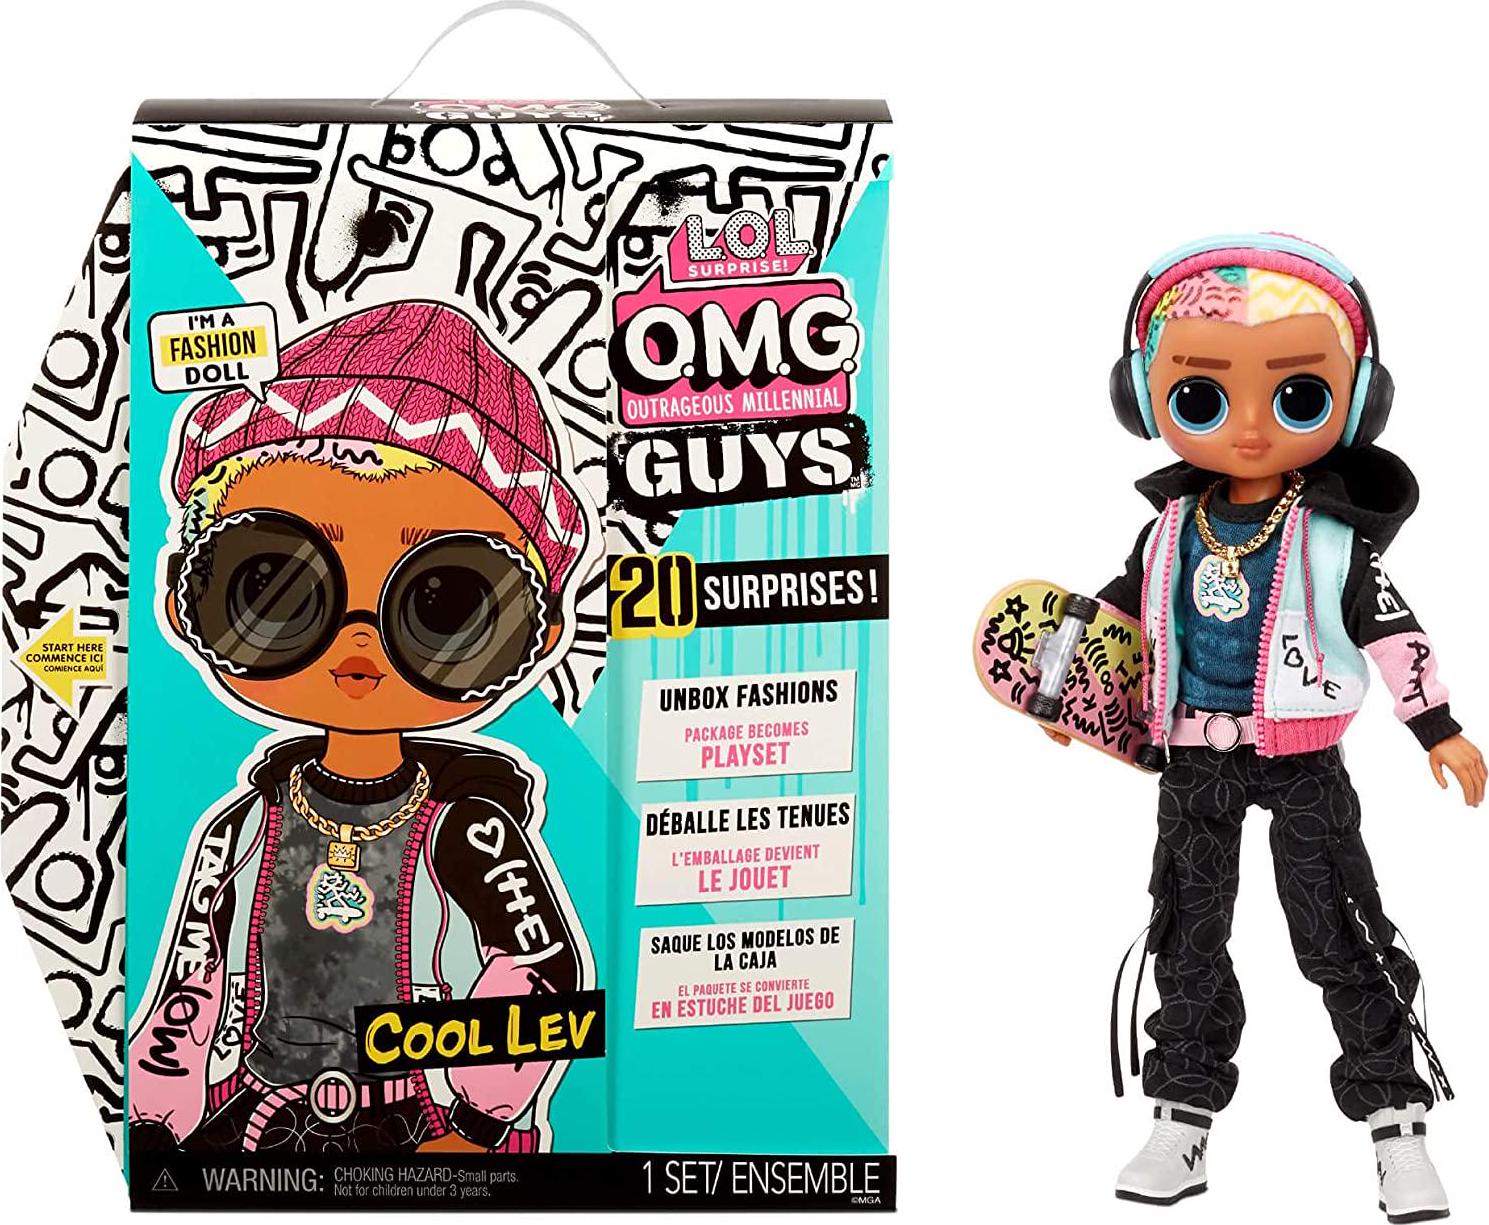 L.O.L. Surprise, LOL Surprise OMG Guys Fashion Doll Cool Lev with 20 Surprises, Poseable, Including Skateboard, Outfit and Accessories Playset - Kids and Collectors, Toys for Girls Boys Ages 4 5 6 7+ Years Old